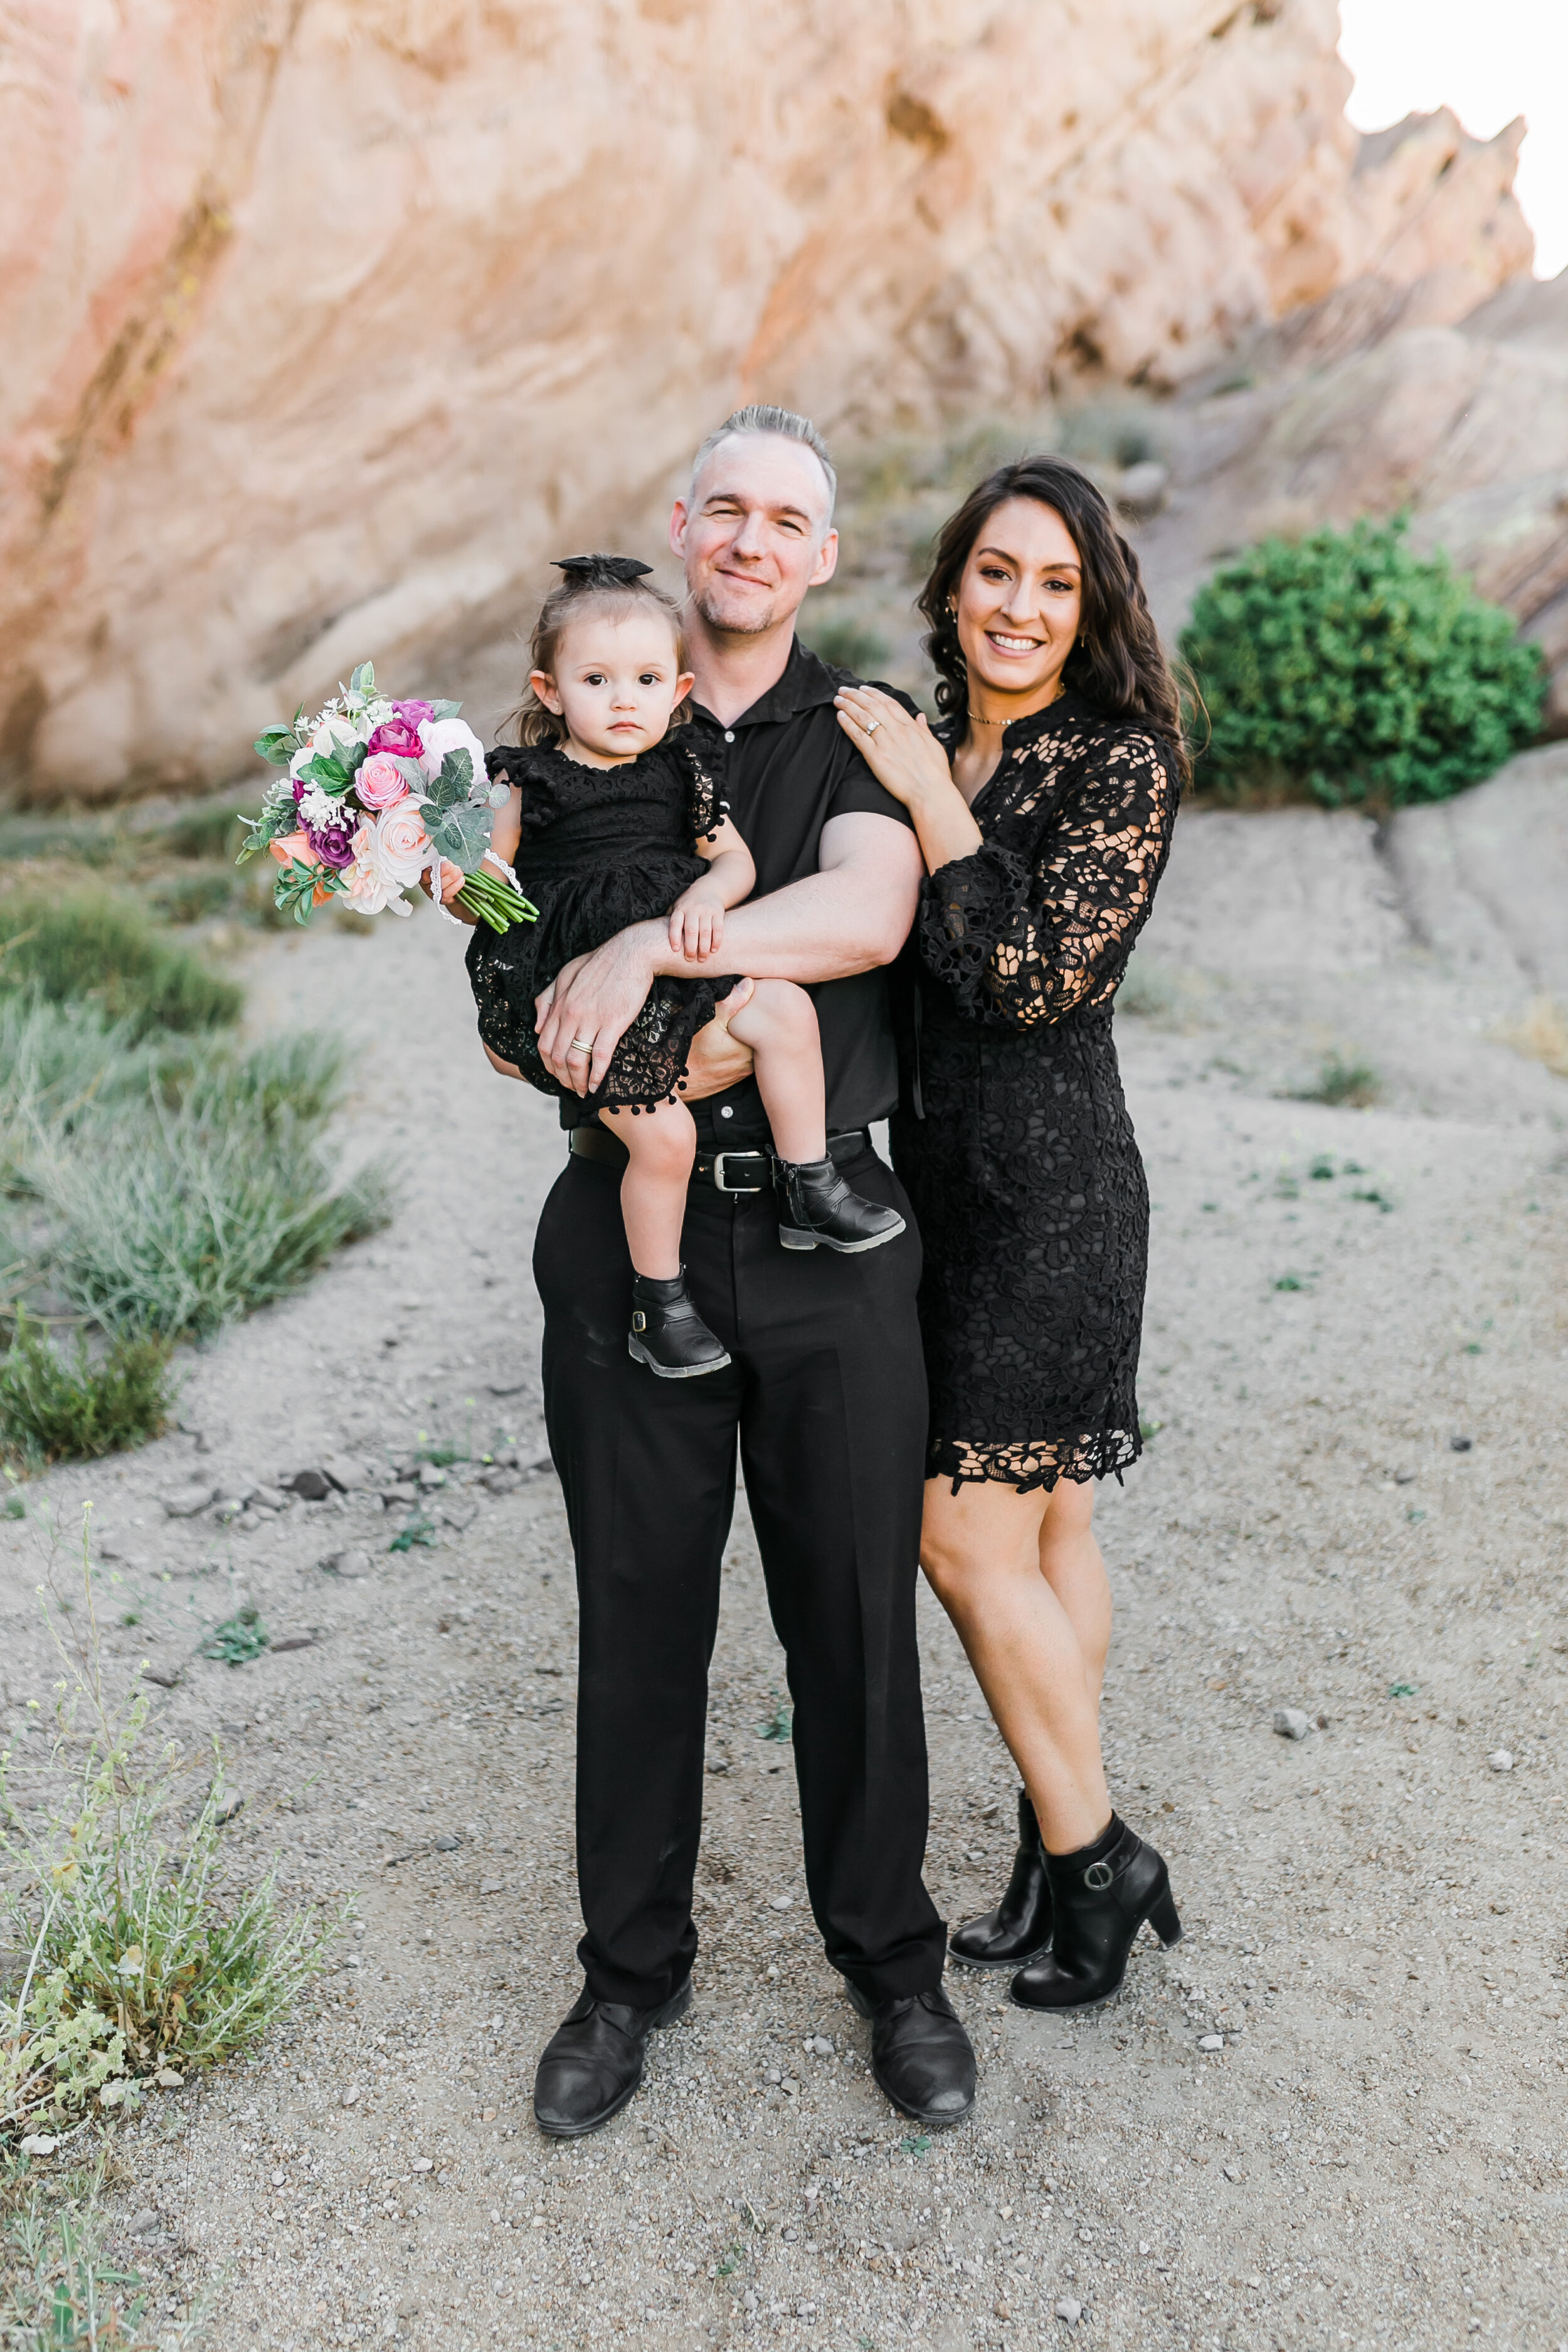  engagement photo with their daughter at vasquez rocks 